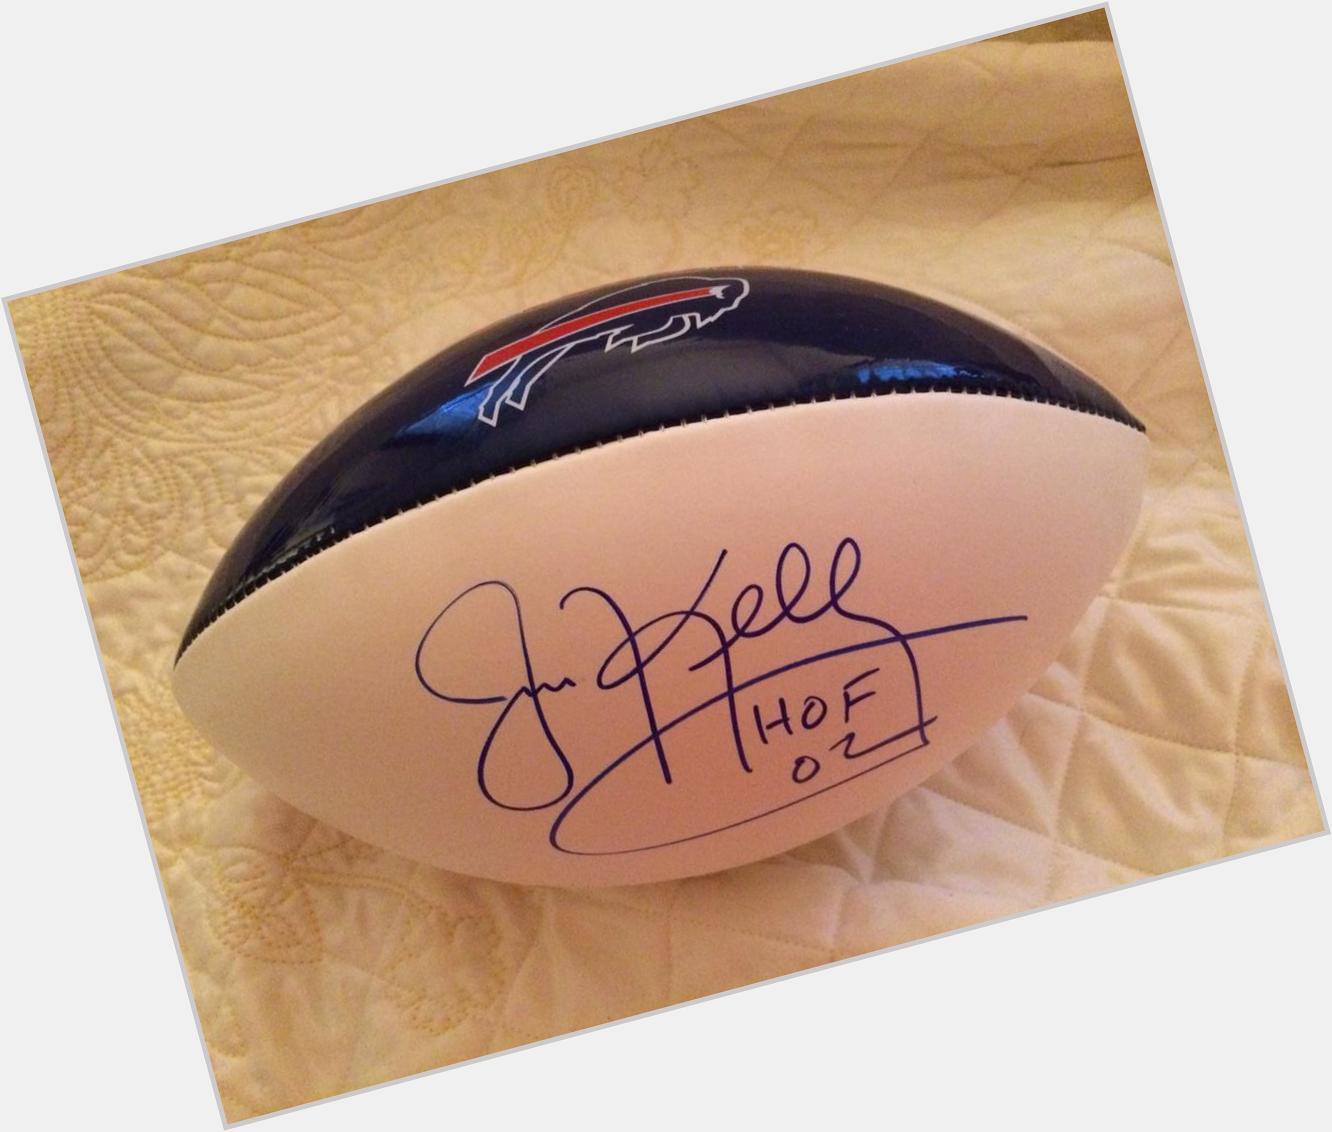 Jim Kelly gave me this football because our birthdays are a day apart. Happy birthday Jim! 